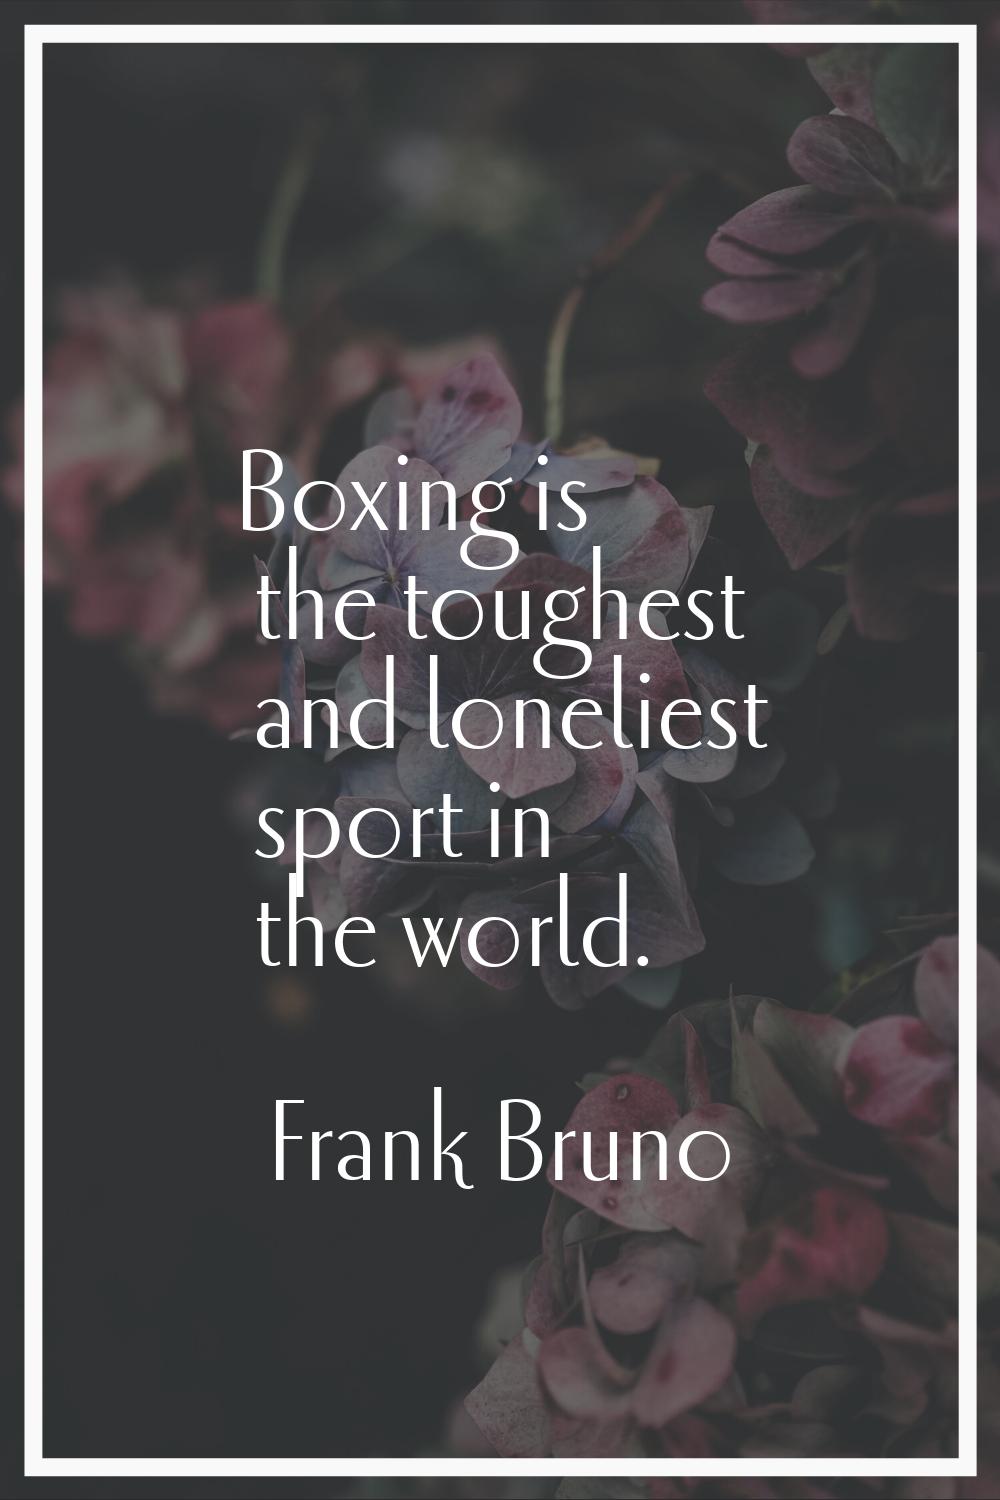 Boxing is the toughest and loneliest sport in the world.